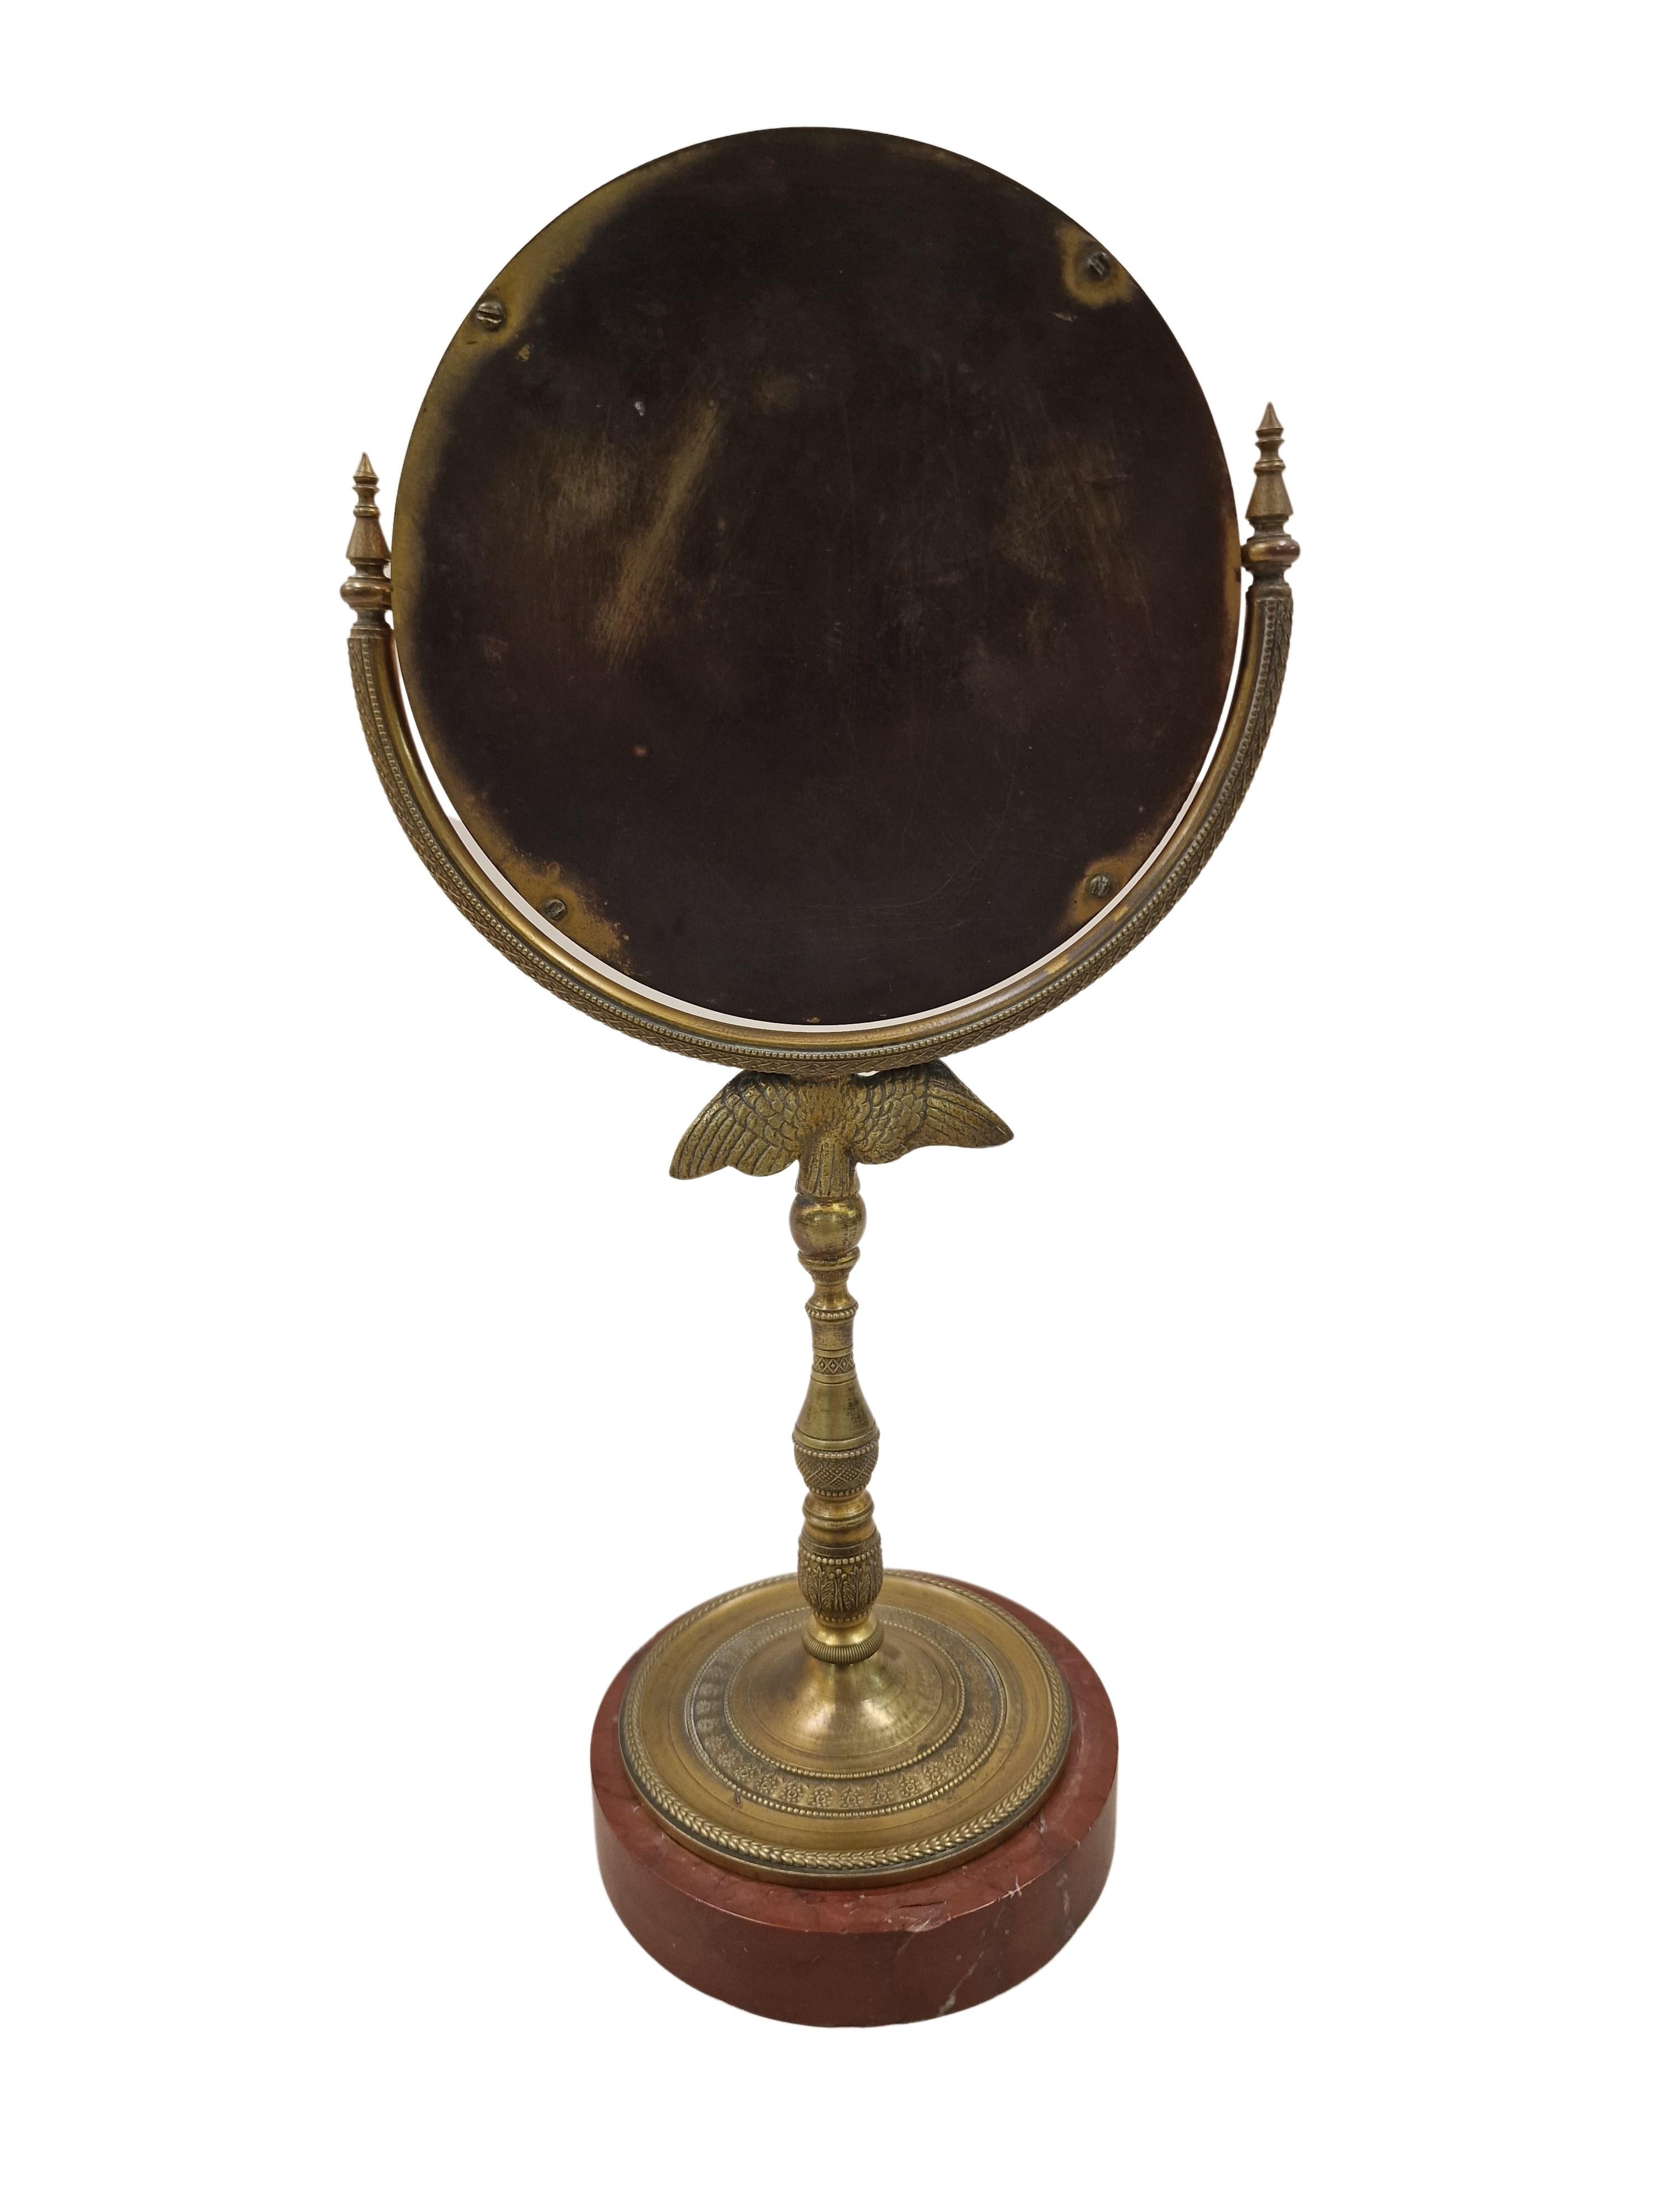 Charming table mirror, a high quality work, made around the 1820s in France. 

The stand is out of bronze with a red marble base. The bronze stand is very delicately worked, with many beautiful details, including flower decoration, acanthus tendrils